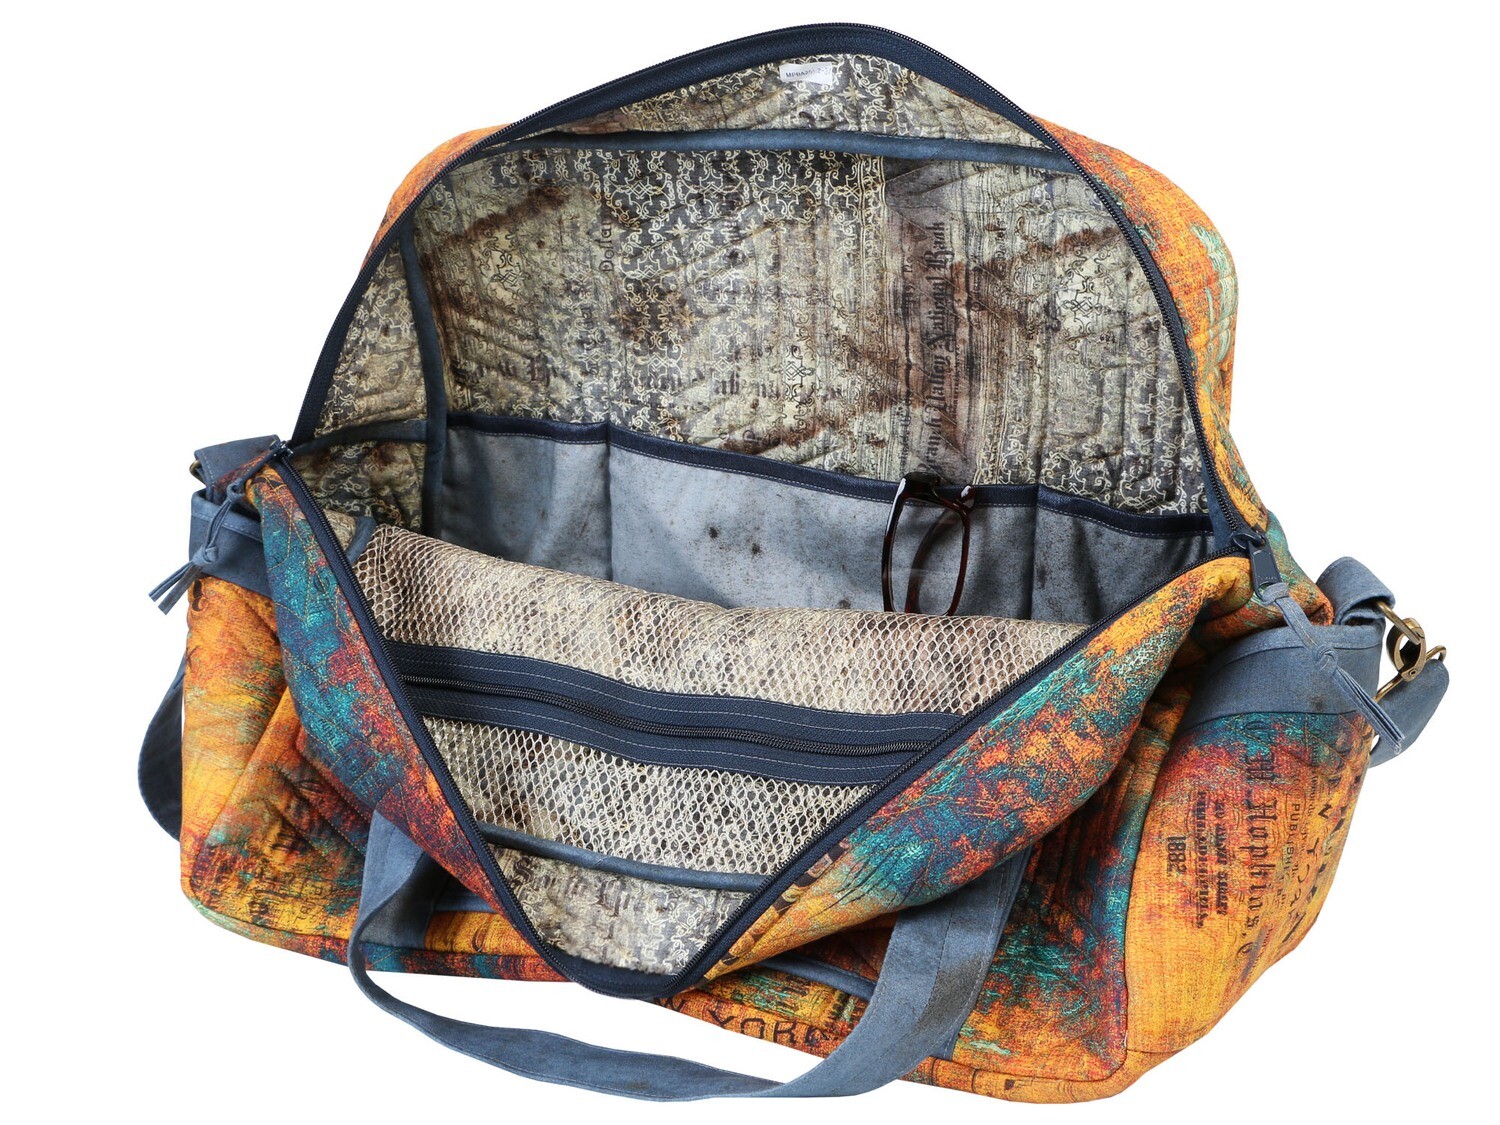 ​ULTIMATE TRAVEL BAG - Patterns By Annie Mondays October 24th & October 31st, 10:30 am - 4:30 pm